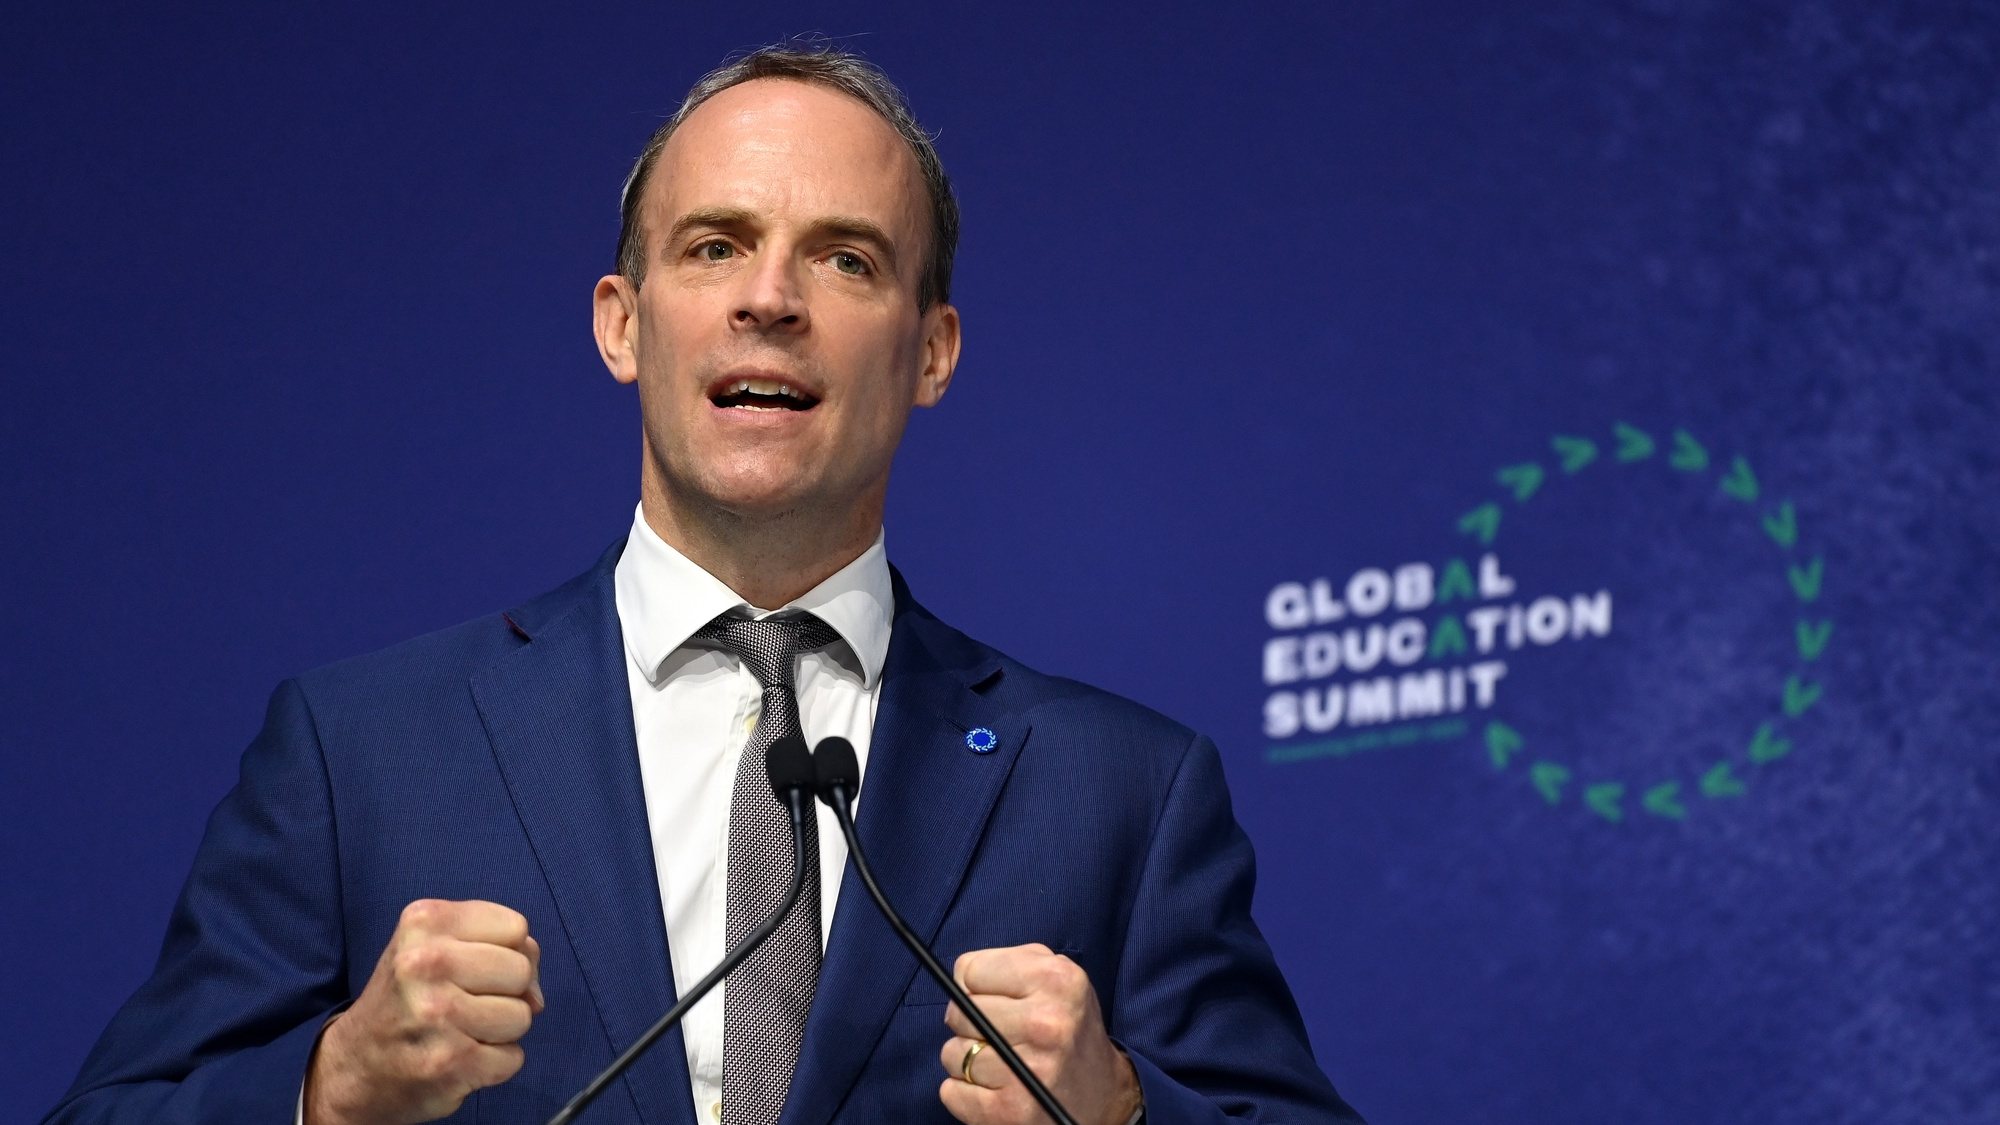 epa09376246 British Foreign Secretary Dominic Raab speaks at the Global Education Summit in London, Britain, 29 July 2021. The UK and Kenya are hosting the Education Summit in London where leaders from world governments have come together to make pledges to support work to help transform education systems in up to 90 countries and territories.  EPA/ANDY RAIN / POOL POOL